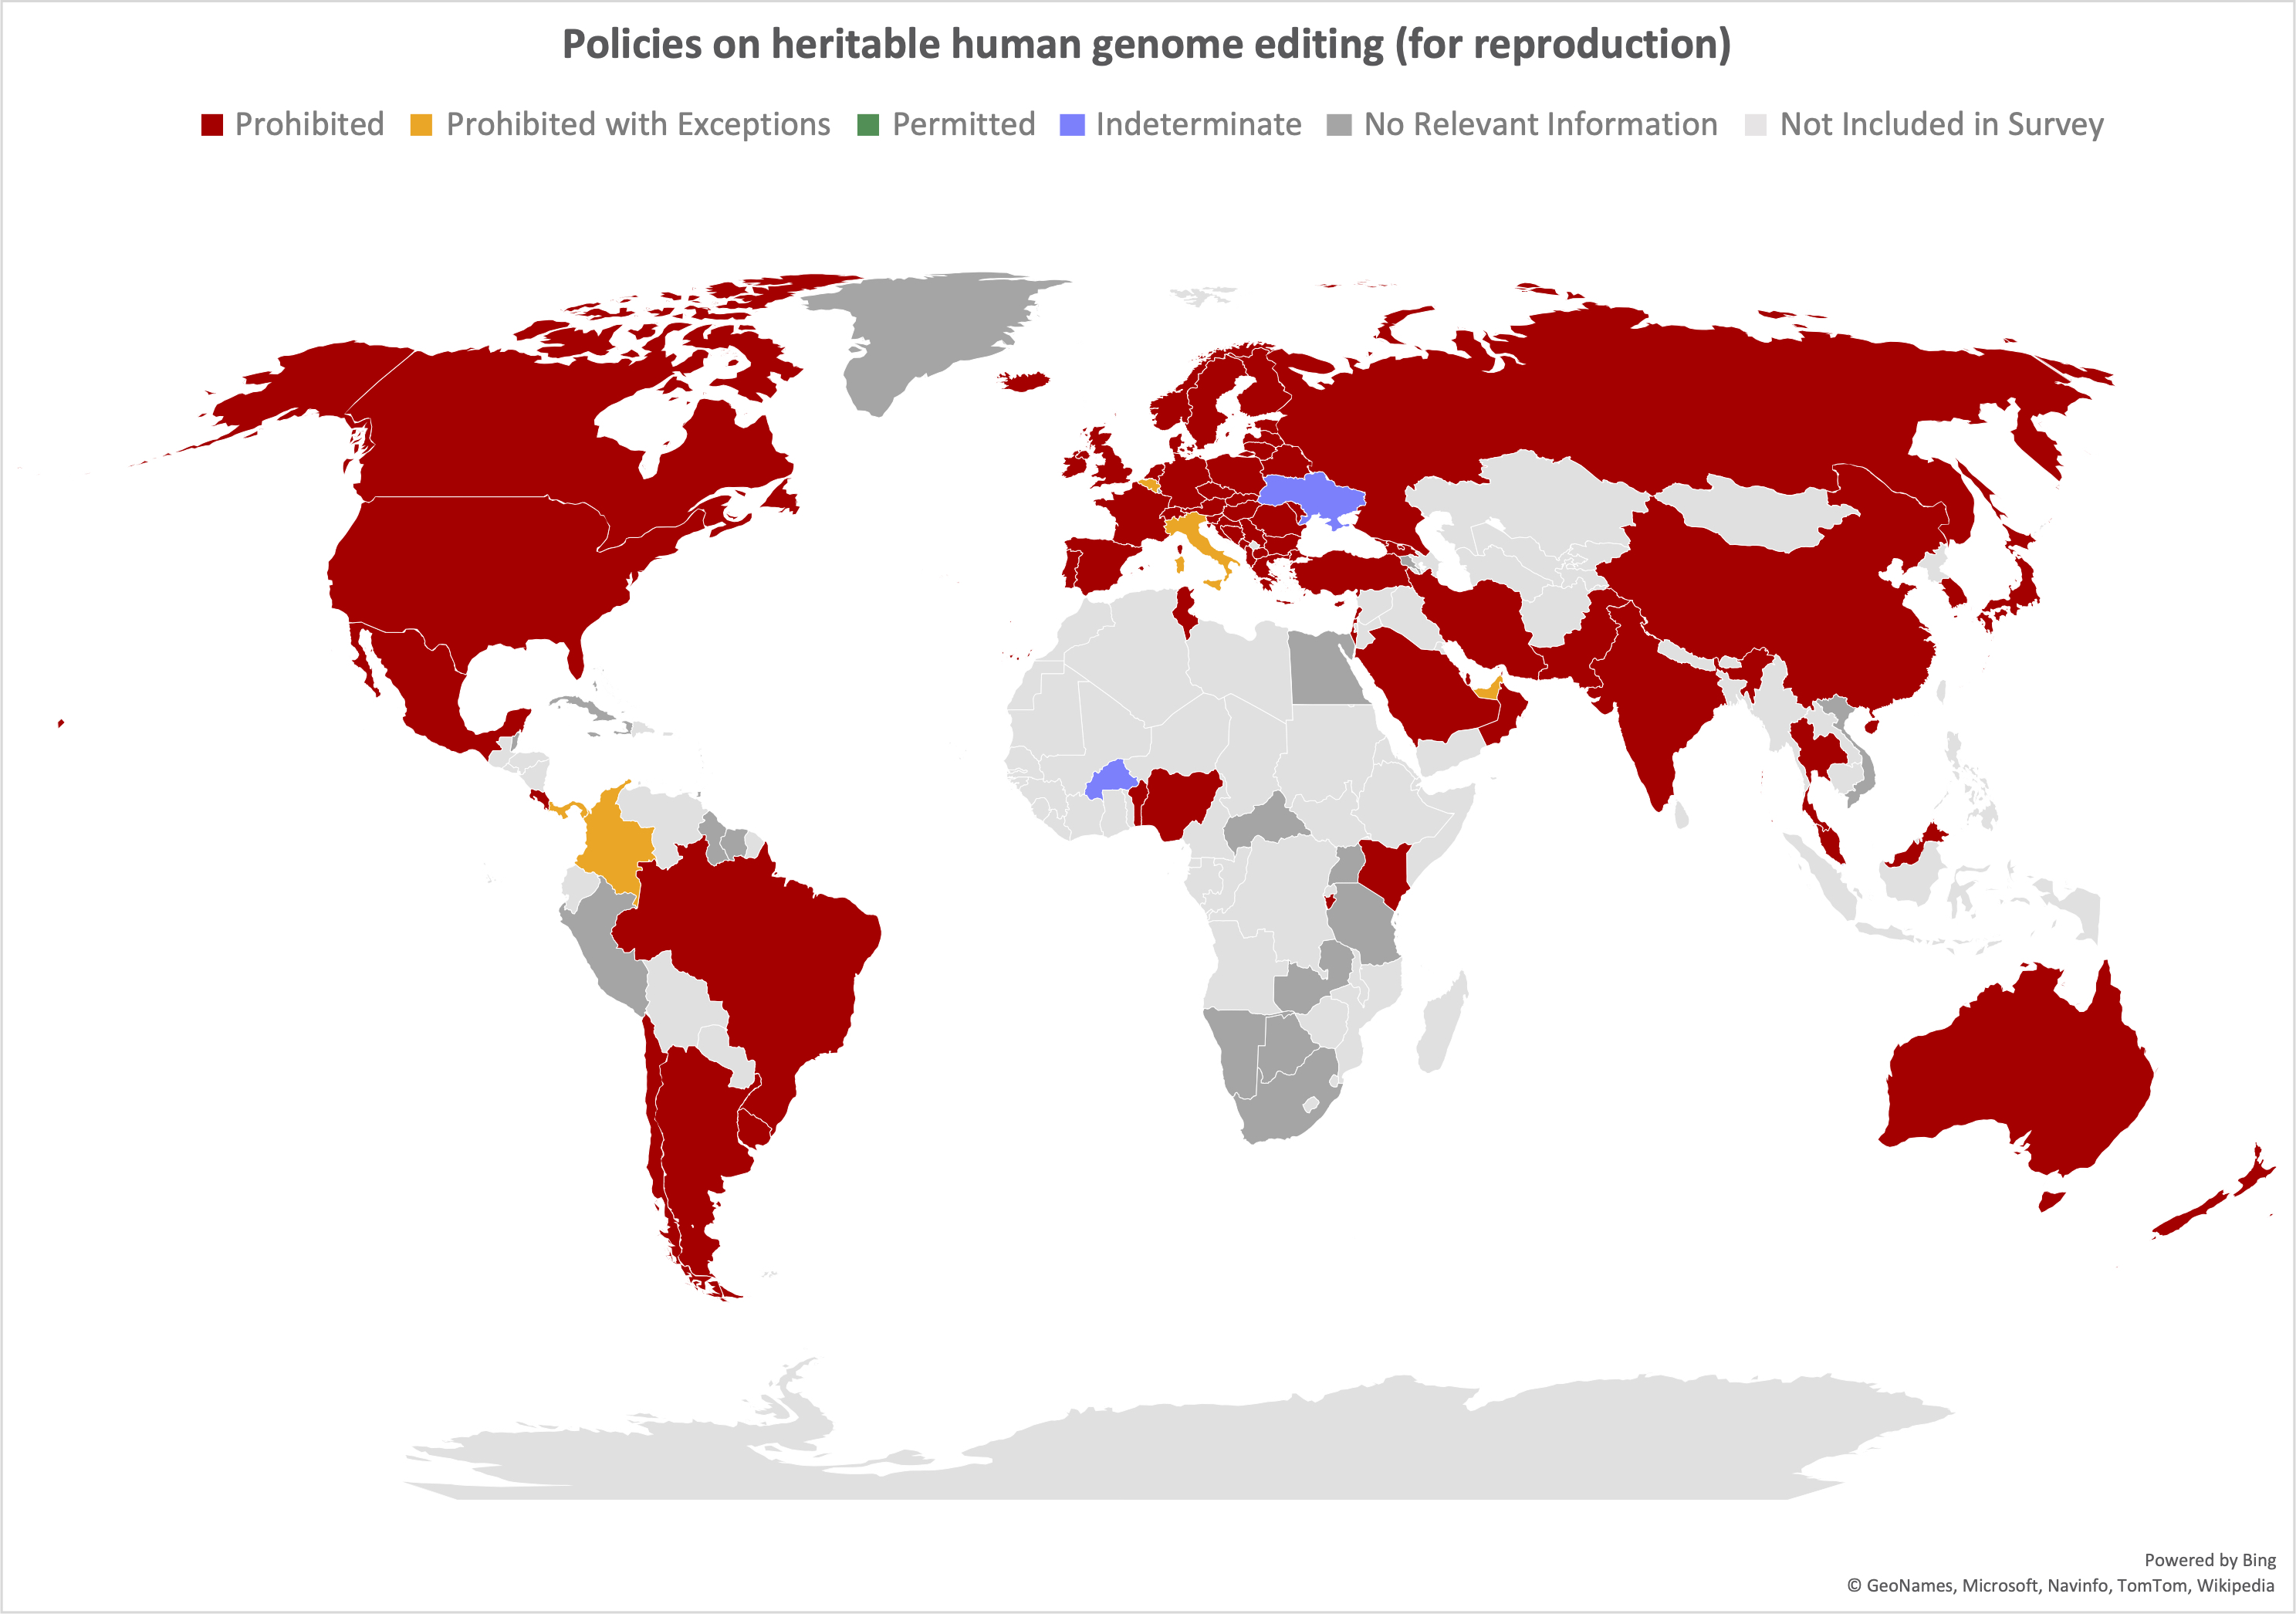 Map showing in red the countries where policies prohibit heritable human genome editing